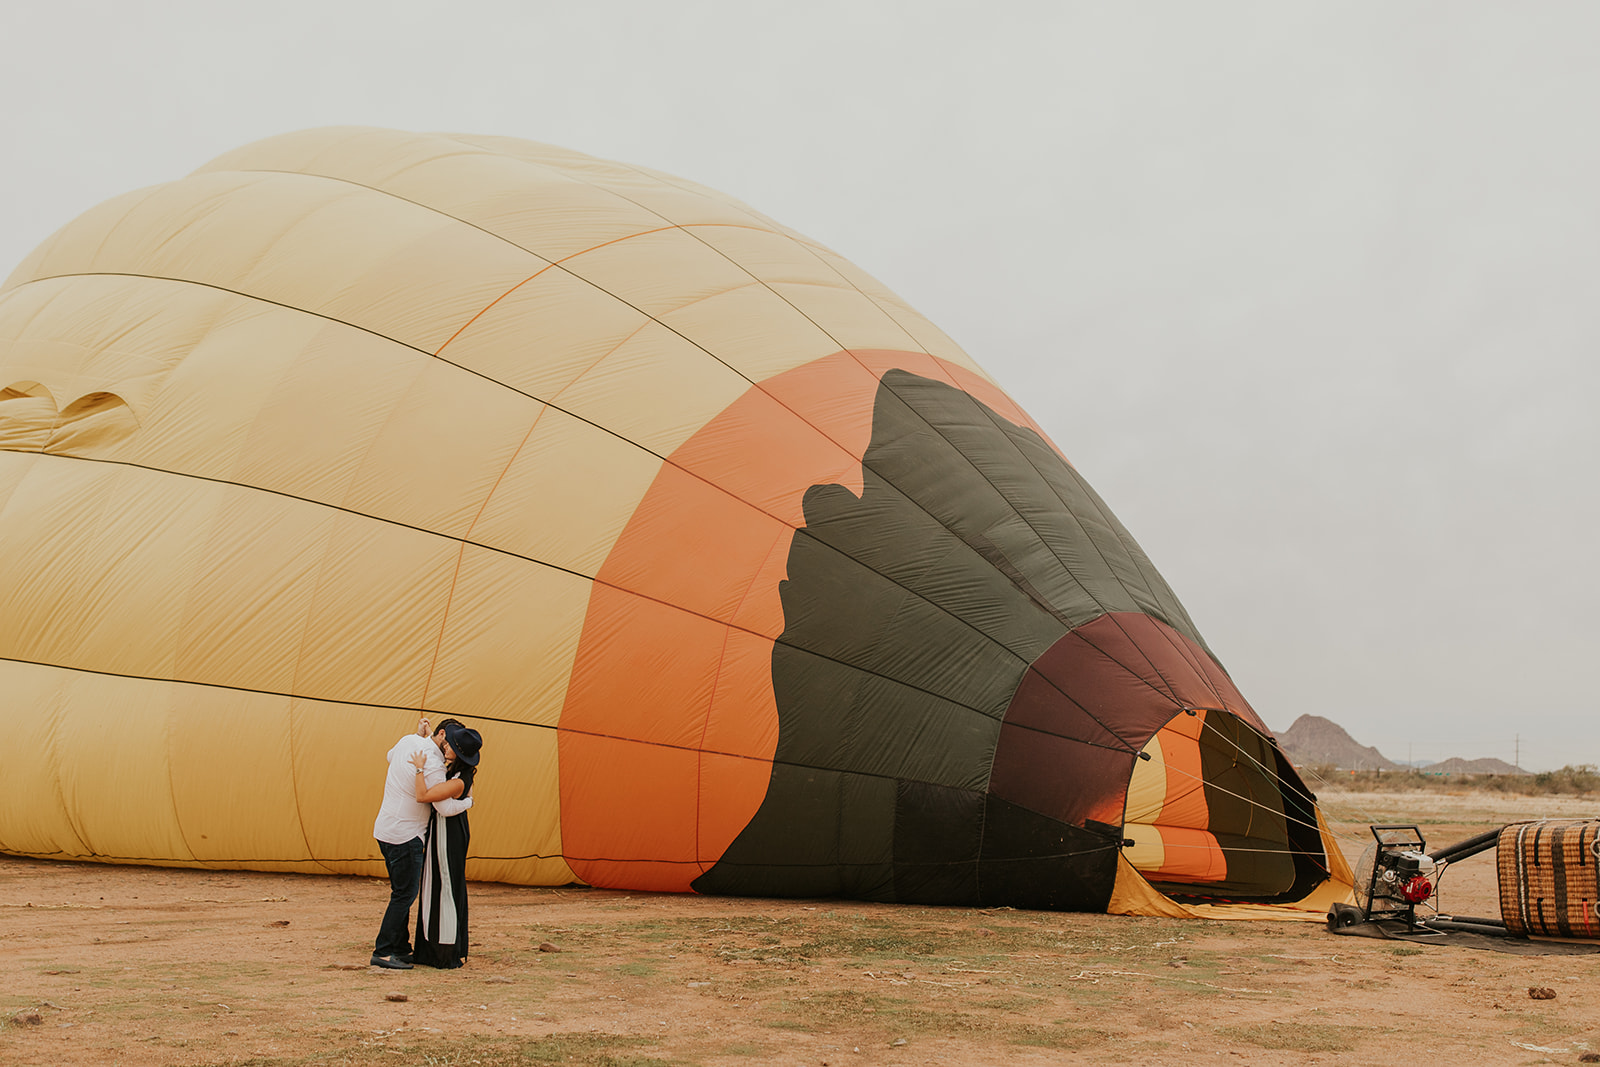 Happy couple takes fun engagement pics by hot air balloon.